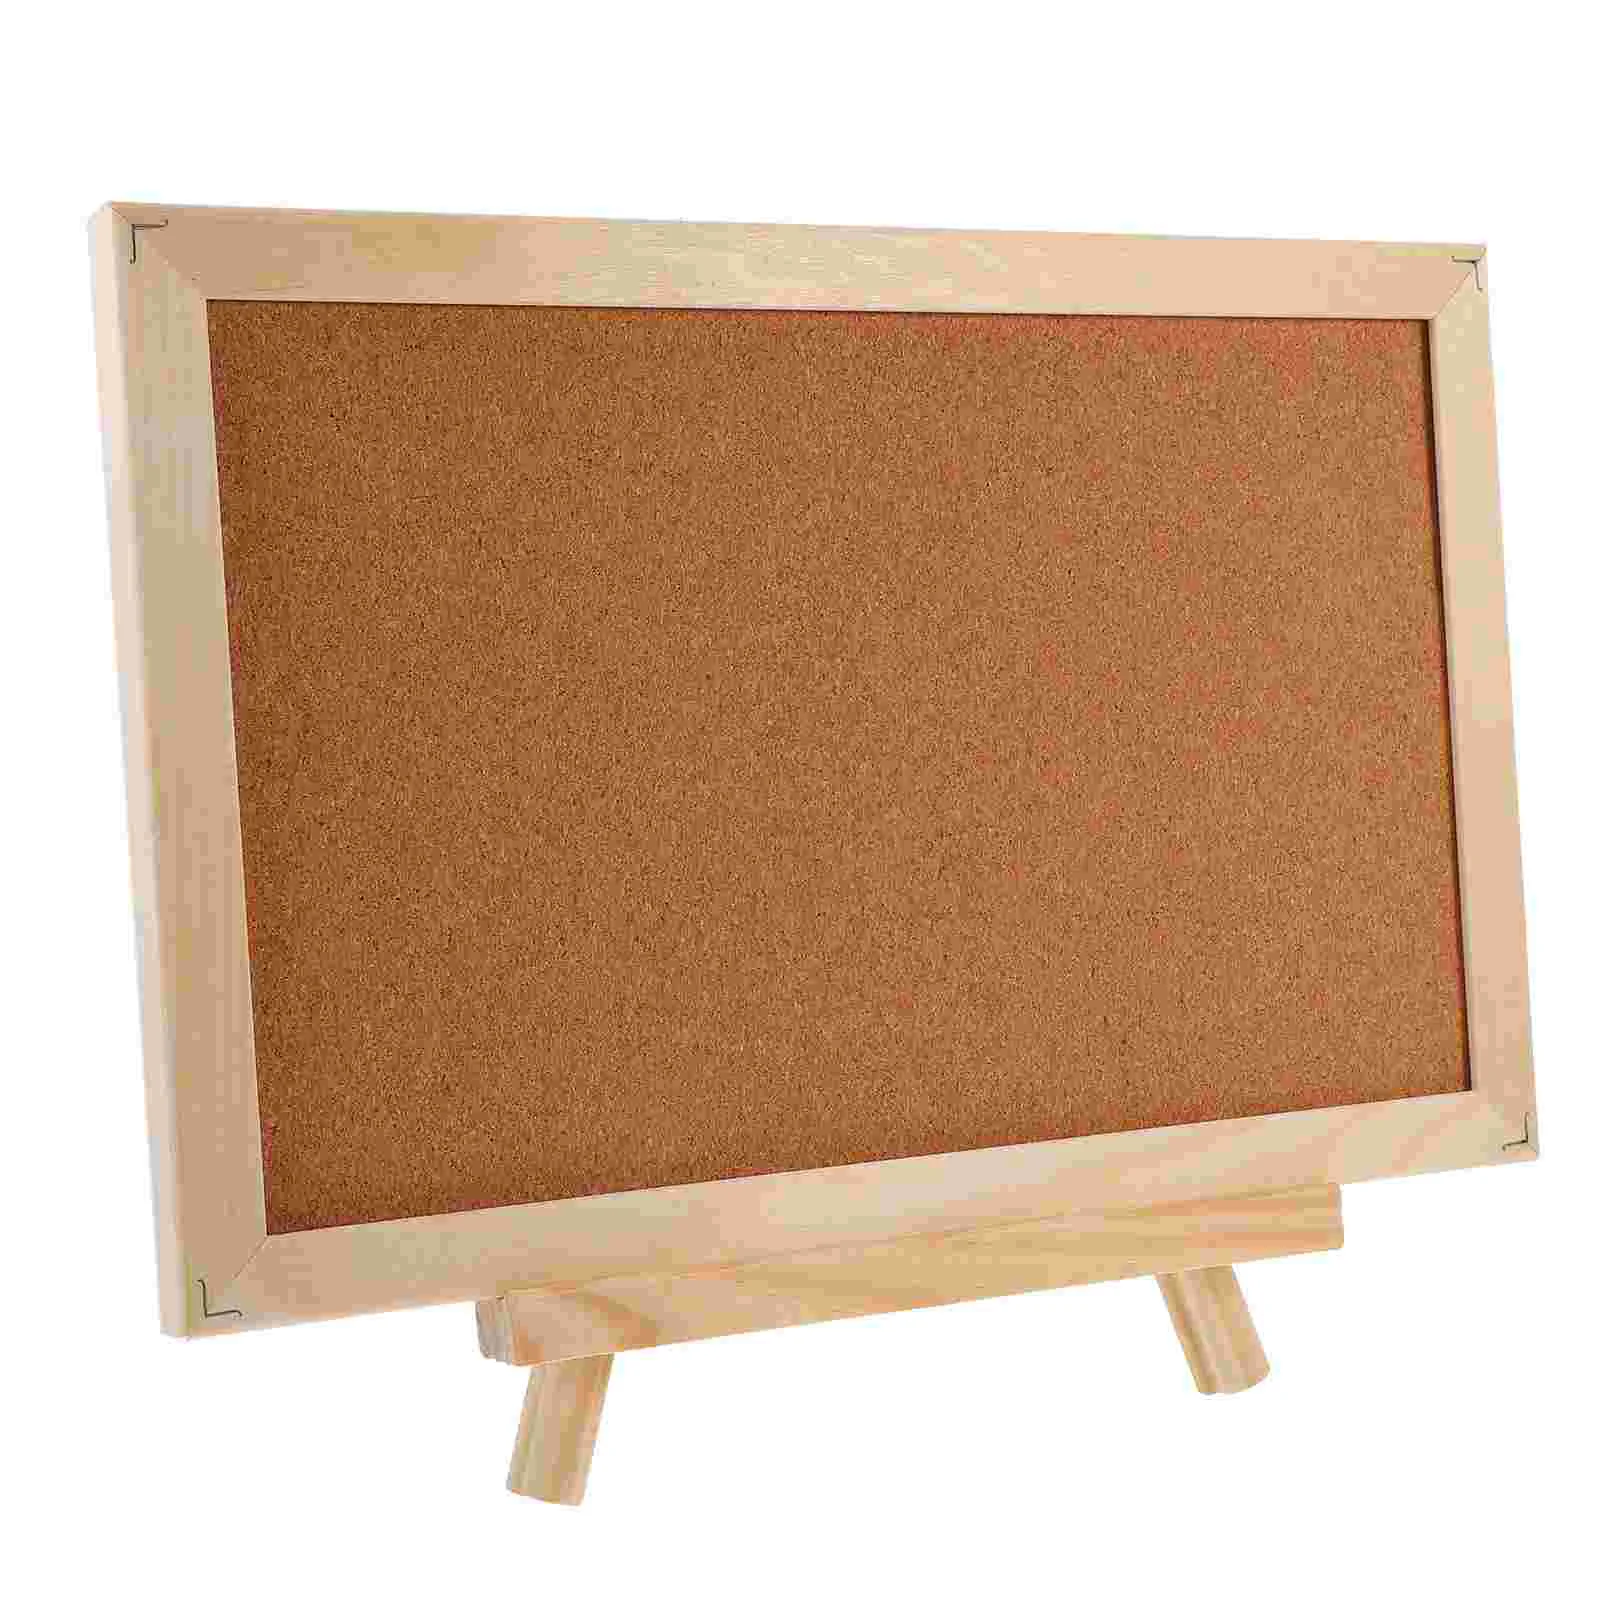 

Board with Easel Stand Wood Easel Display Stand Framed Show Rack Wood Tripod Easel Cork Display Board Notice Board Small